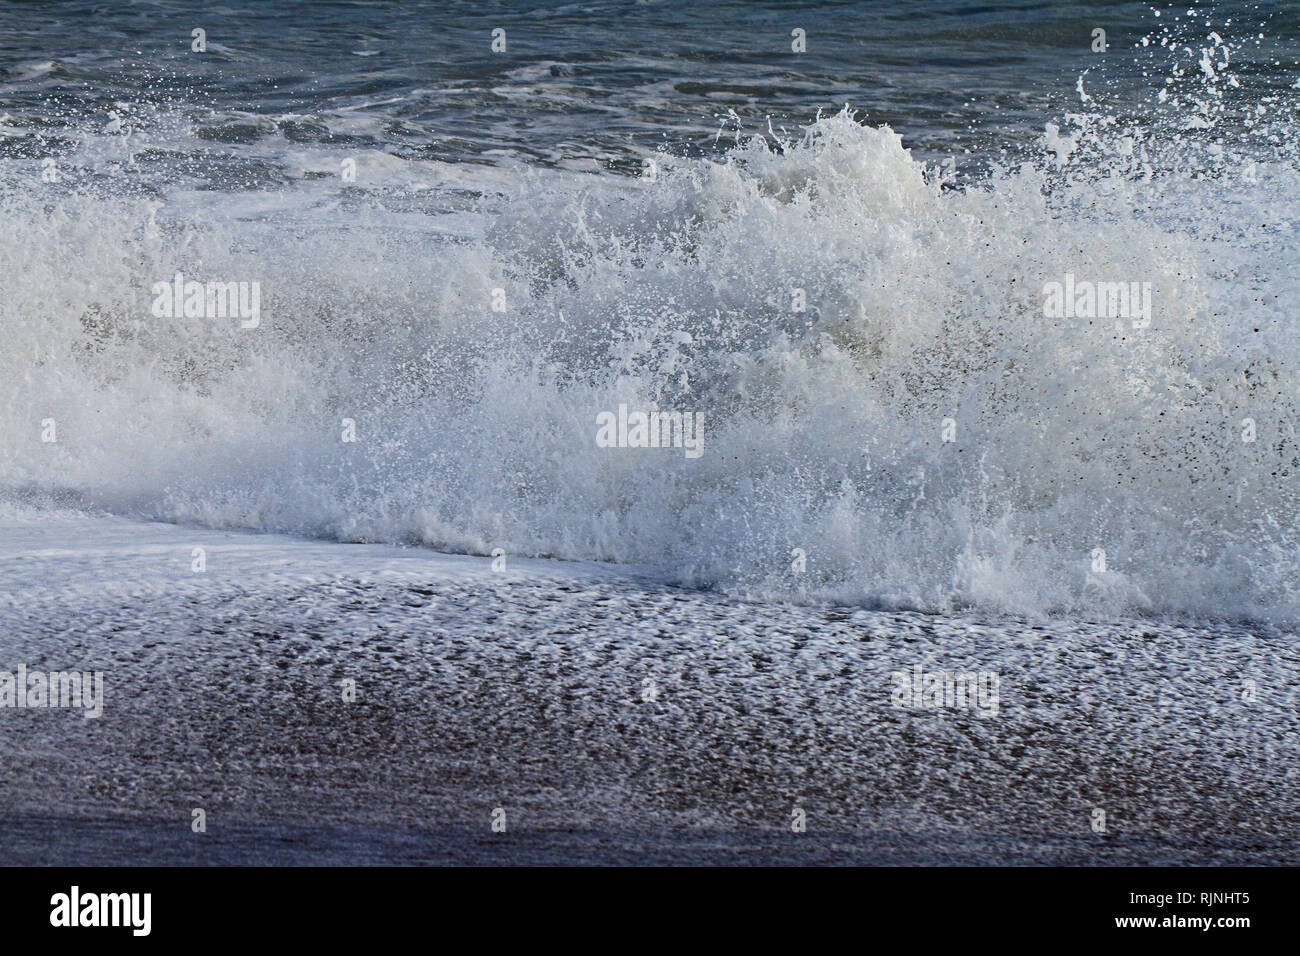 Rough or angry sea in winter in Porto Recanati in the province of Ancona Italy near Monte Conero with the sea foaming and splashing on the beach Stock Photo